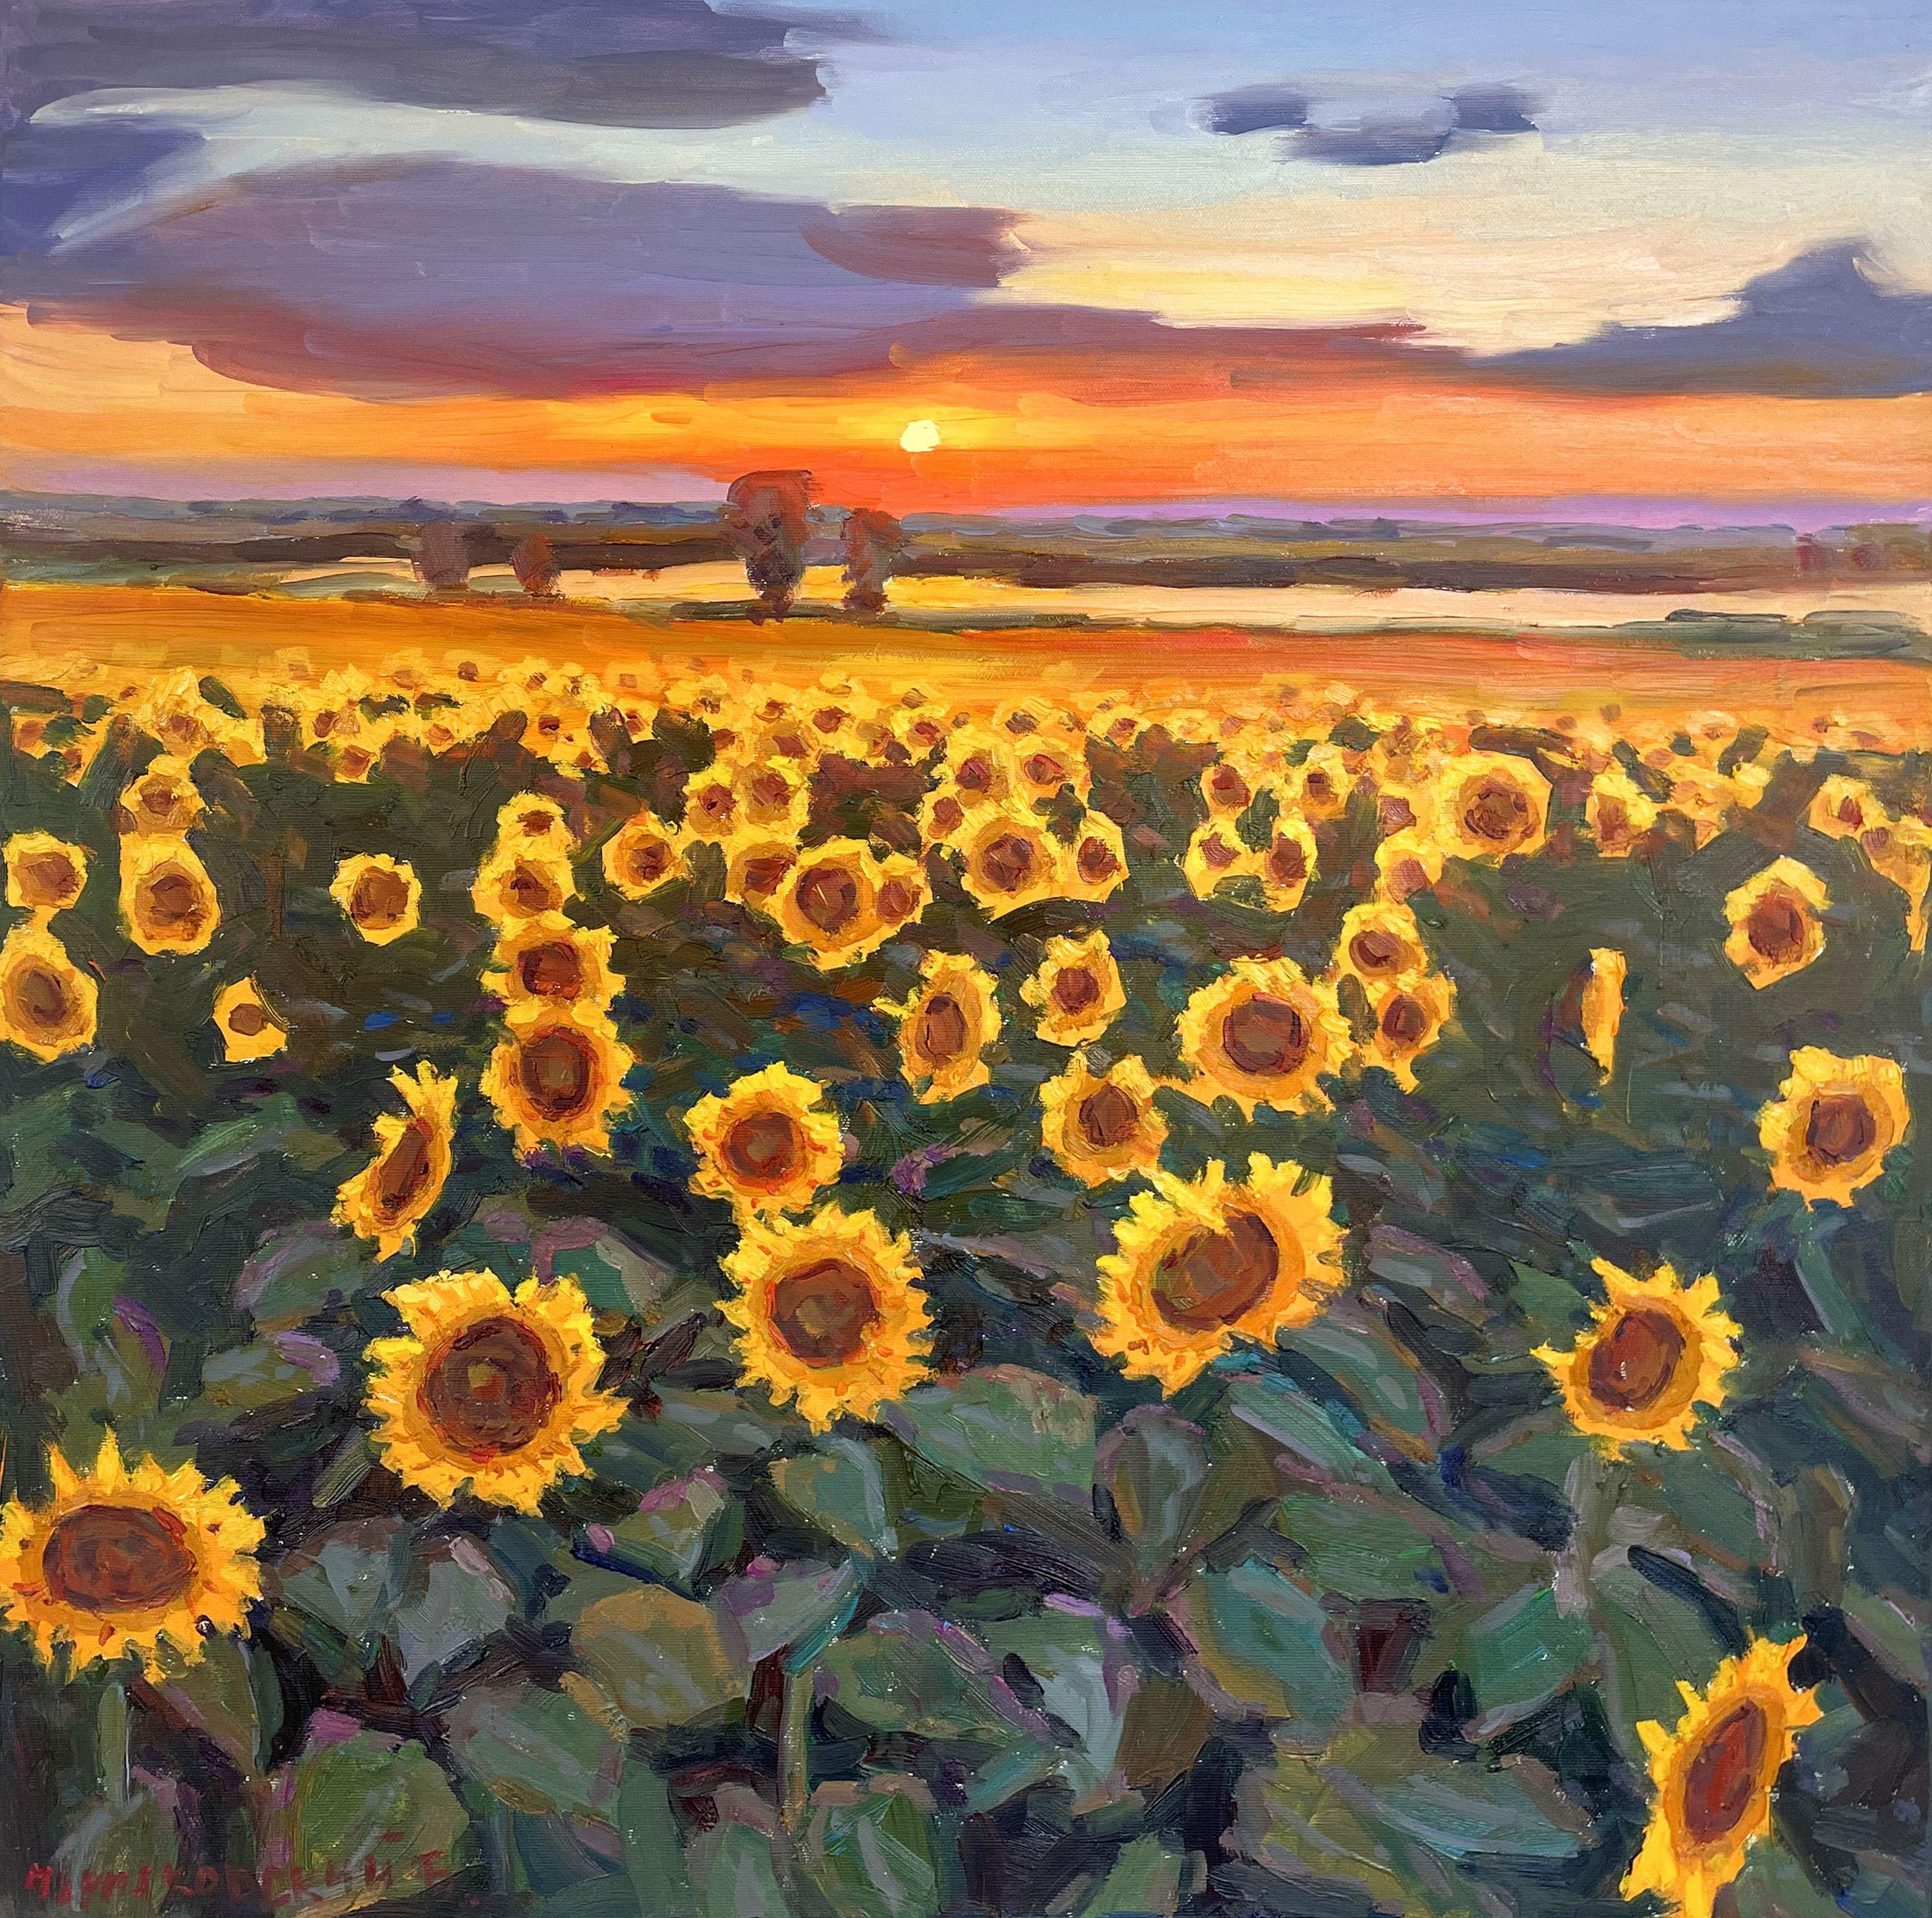 Original Oil painting by Ukrainian artist Evgeny Chernyakovsky      "  Sunflowers"  70.0 X 70.0 CM / 27.5 X 27.5 IN  HIGH QUALITY oil on canvas  Signed on the front and back  Dated 2023  Good condition  GUARANTEE OF AUTHENTICITY   :: Painting ::